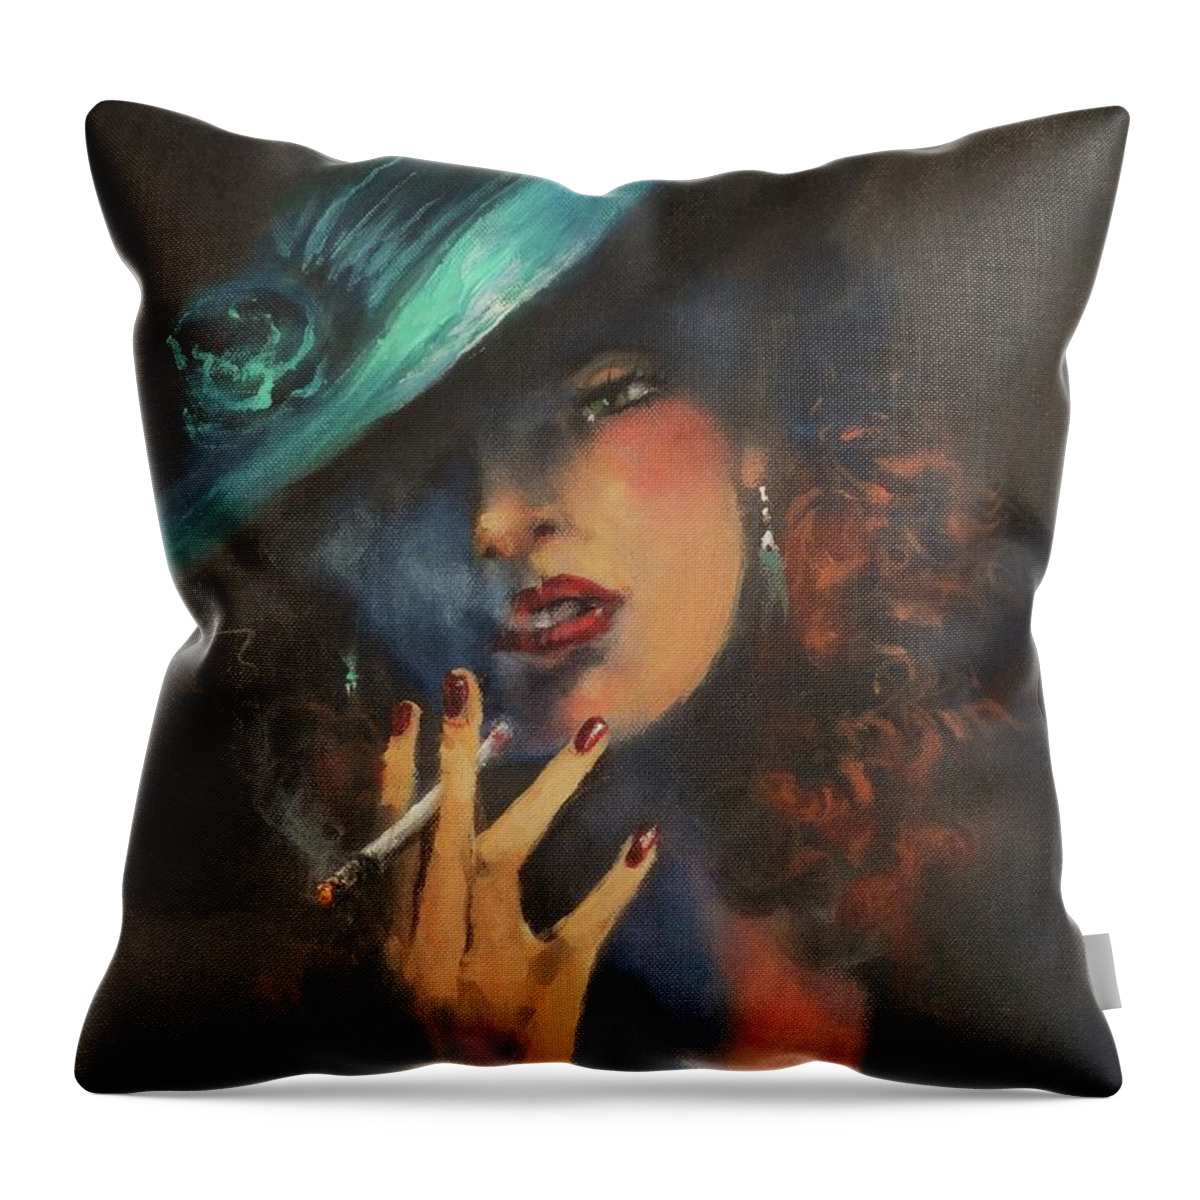 Woman Smoking Cigarette Throw Pillow featuring the painting Smoke Gets In Your Eyes by Tom Shropshire